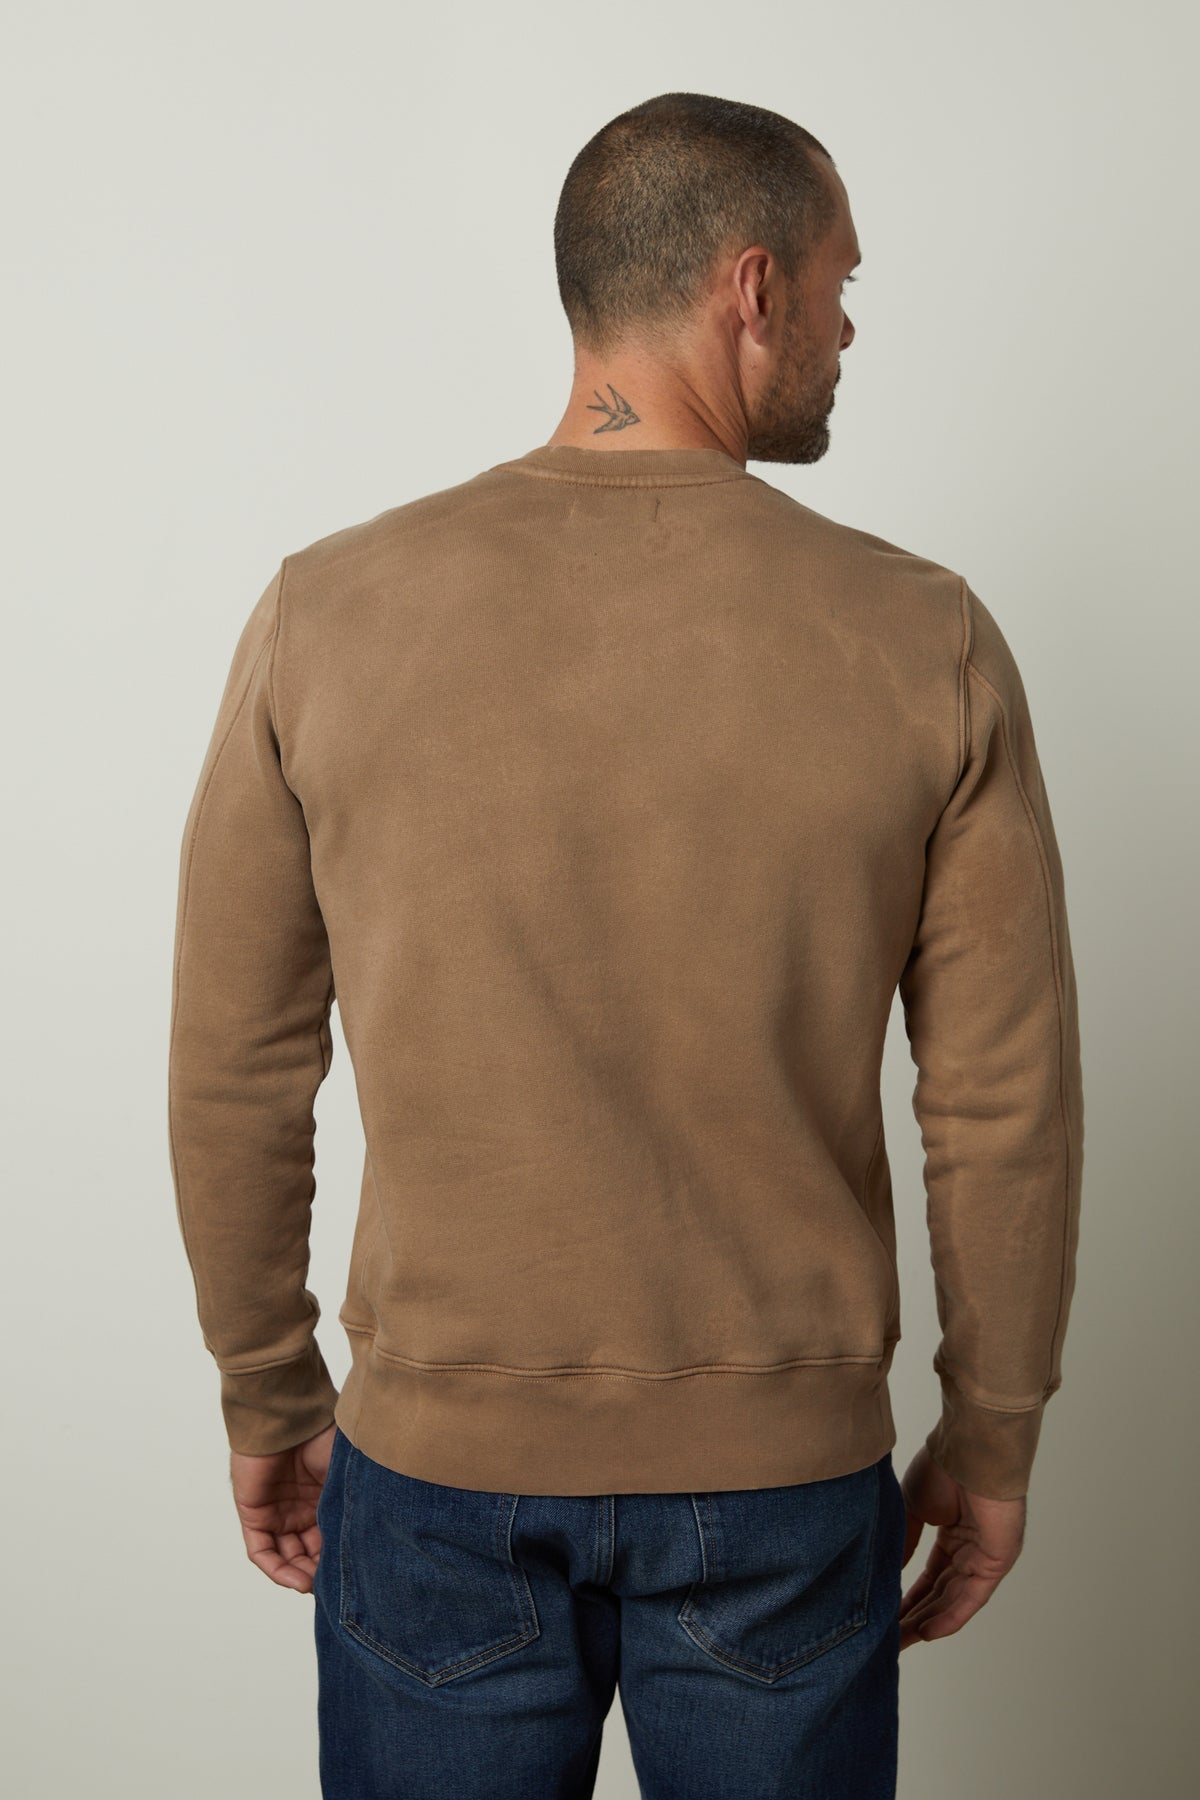   The back view of a man wearing a Velvet by Graham & Spencer MATTS CREW NECK SWEATSHIRT for comfort and warmth. 